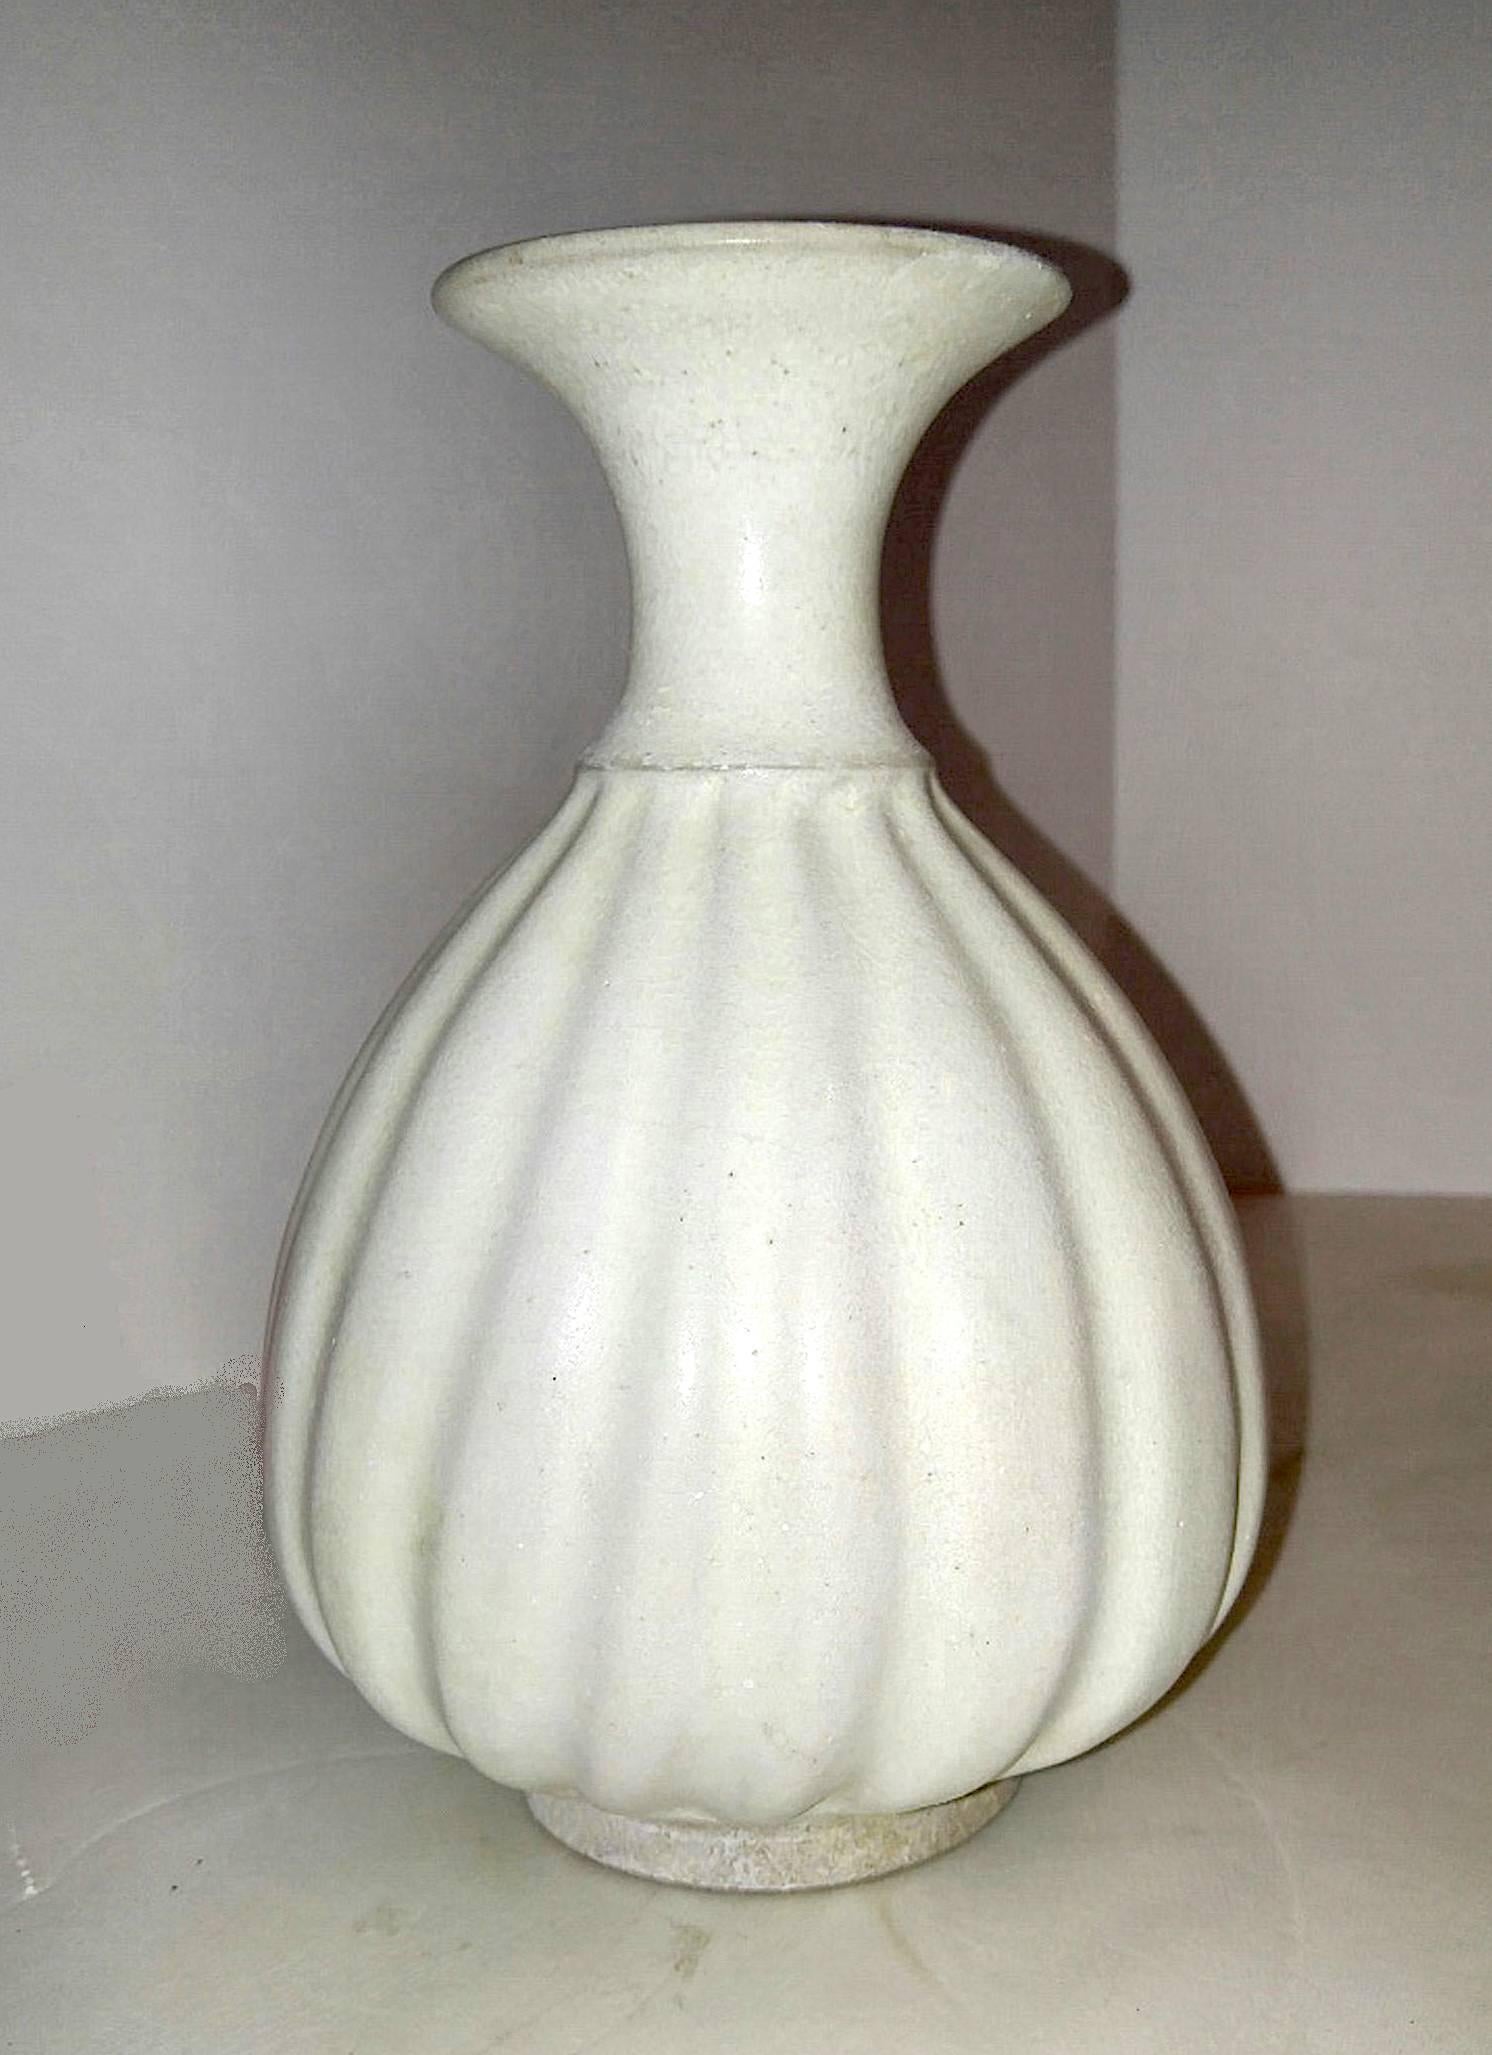 Ceramic vase in white glaze, from Thailand. Waved body, fluted neck. Excellent vintage condition.